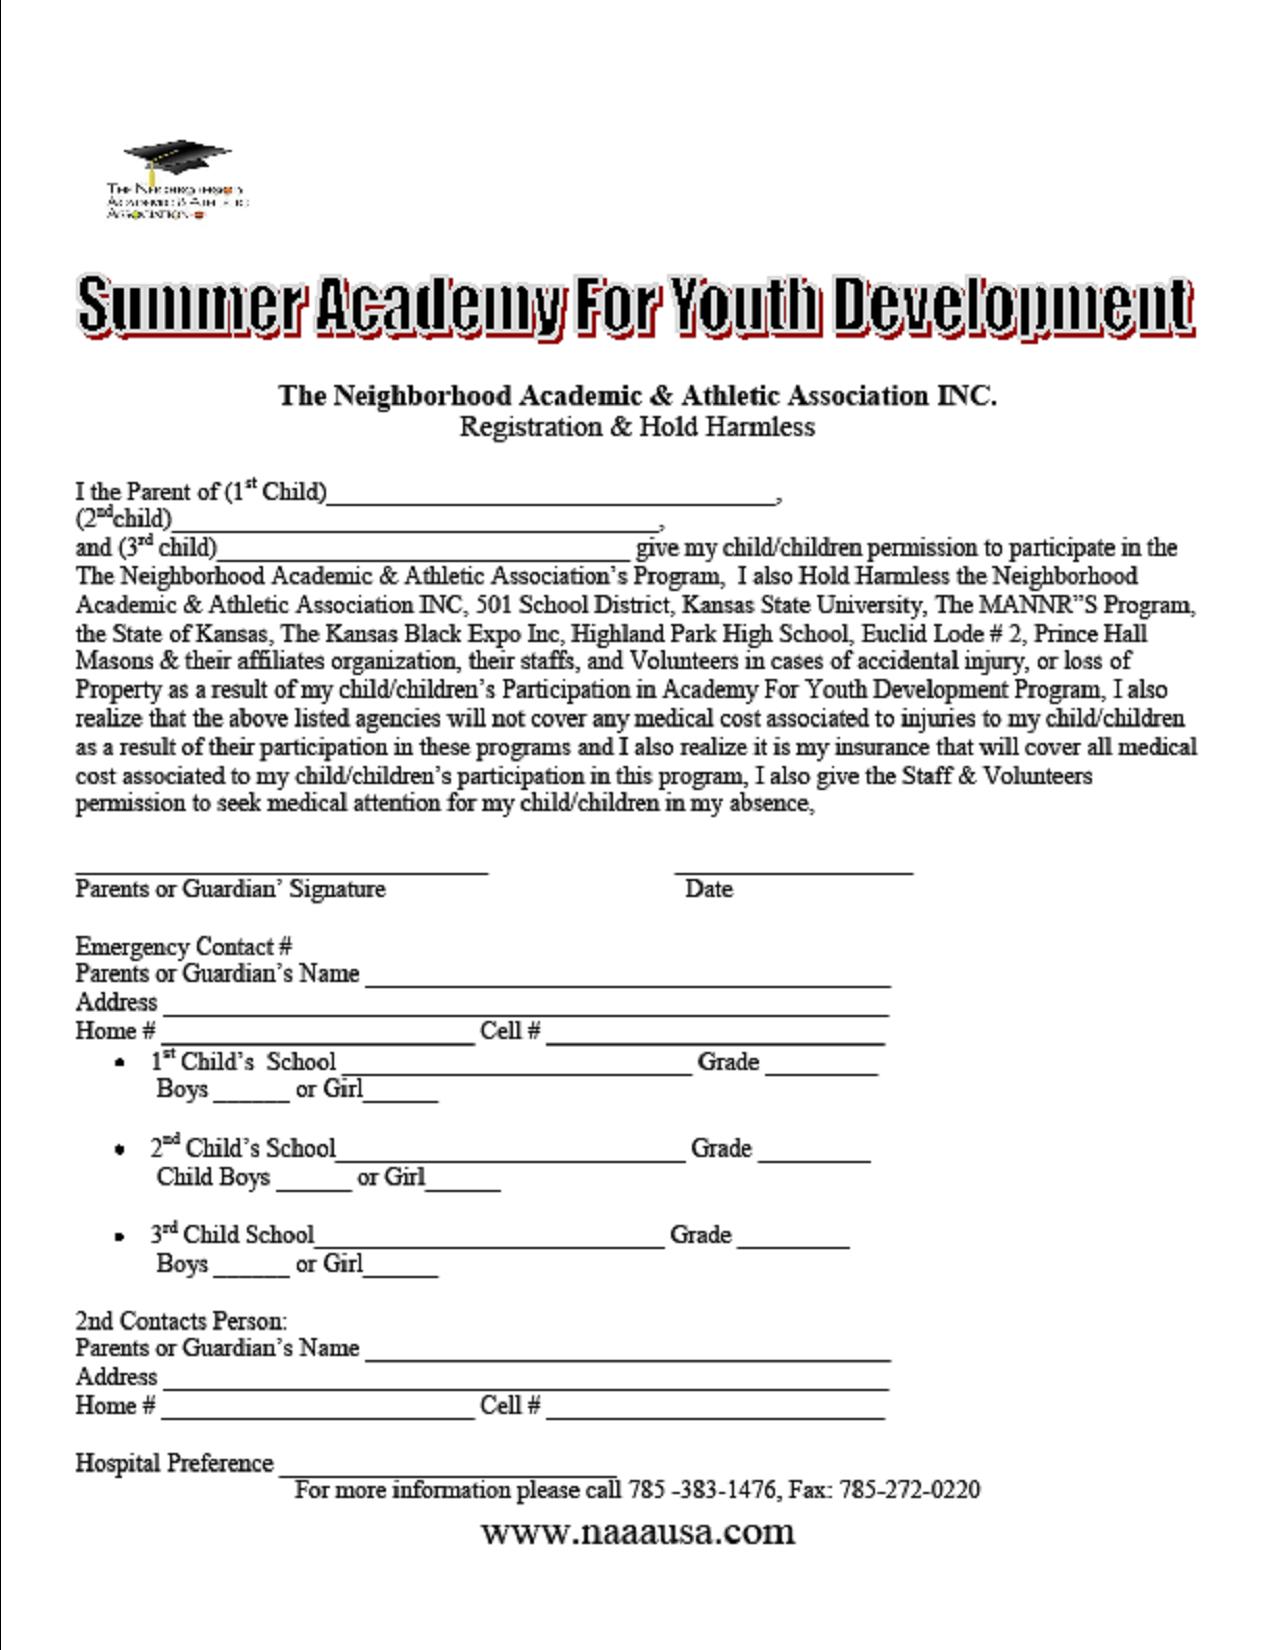 academy_For_Youth_Development_2012_Registration_Form